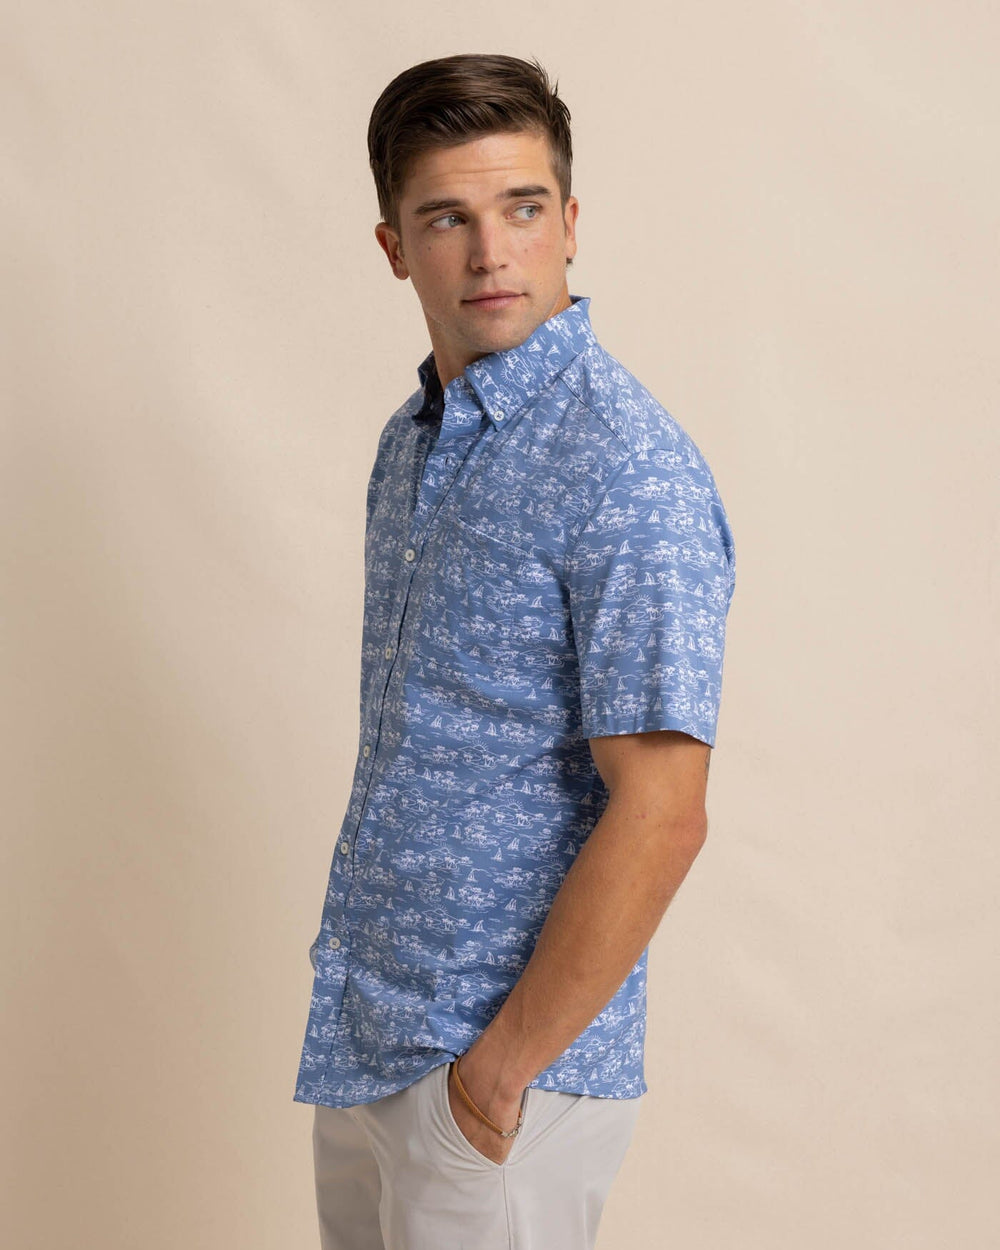 The front view of the Southern Tide brrr Intercoastal Sunset Beach Short Sleeve SportShirt by Southern Tide - Coronet Blue